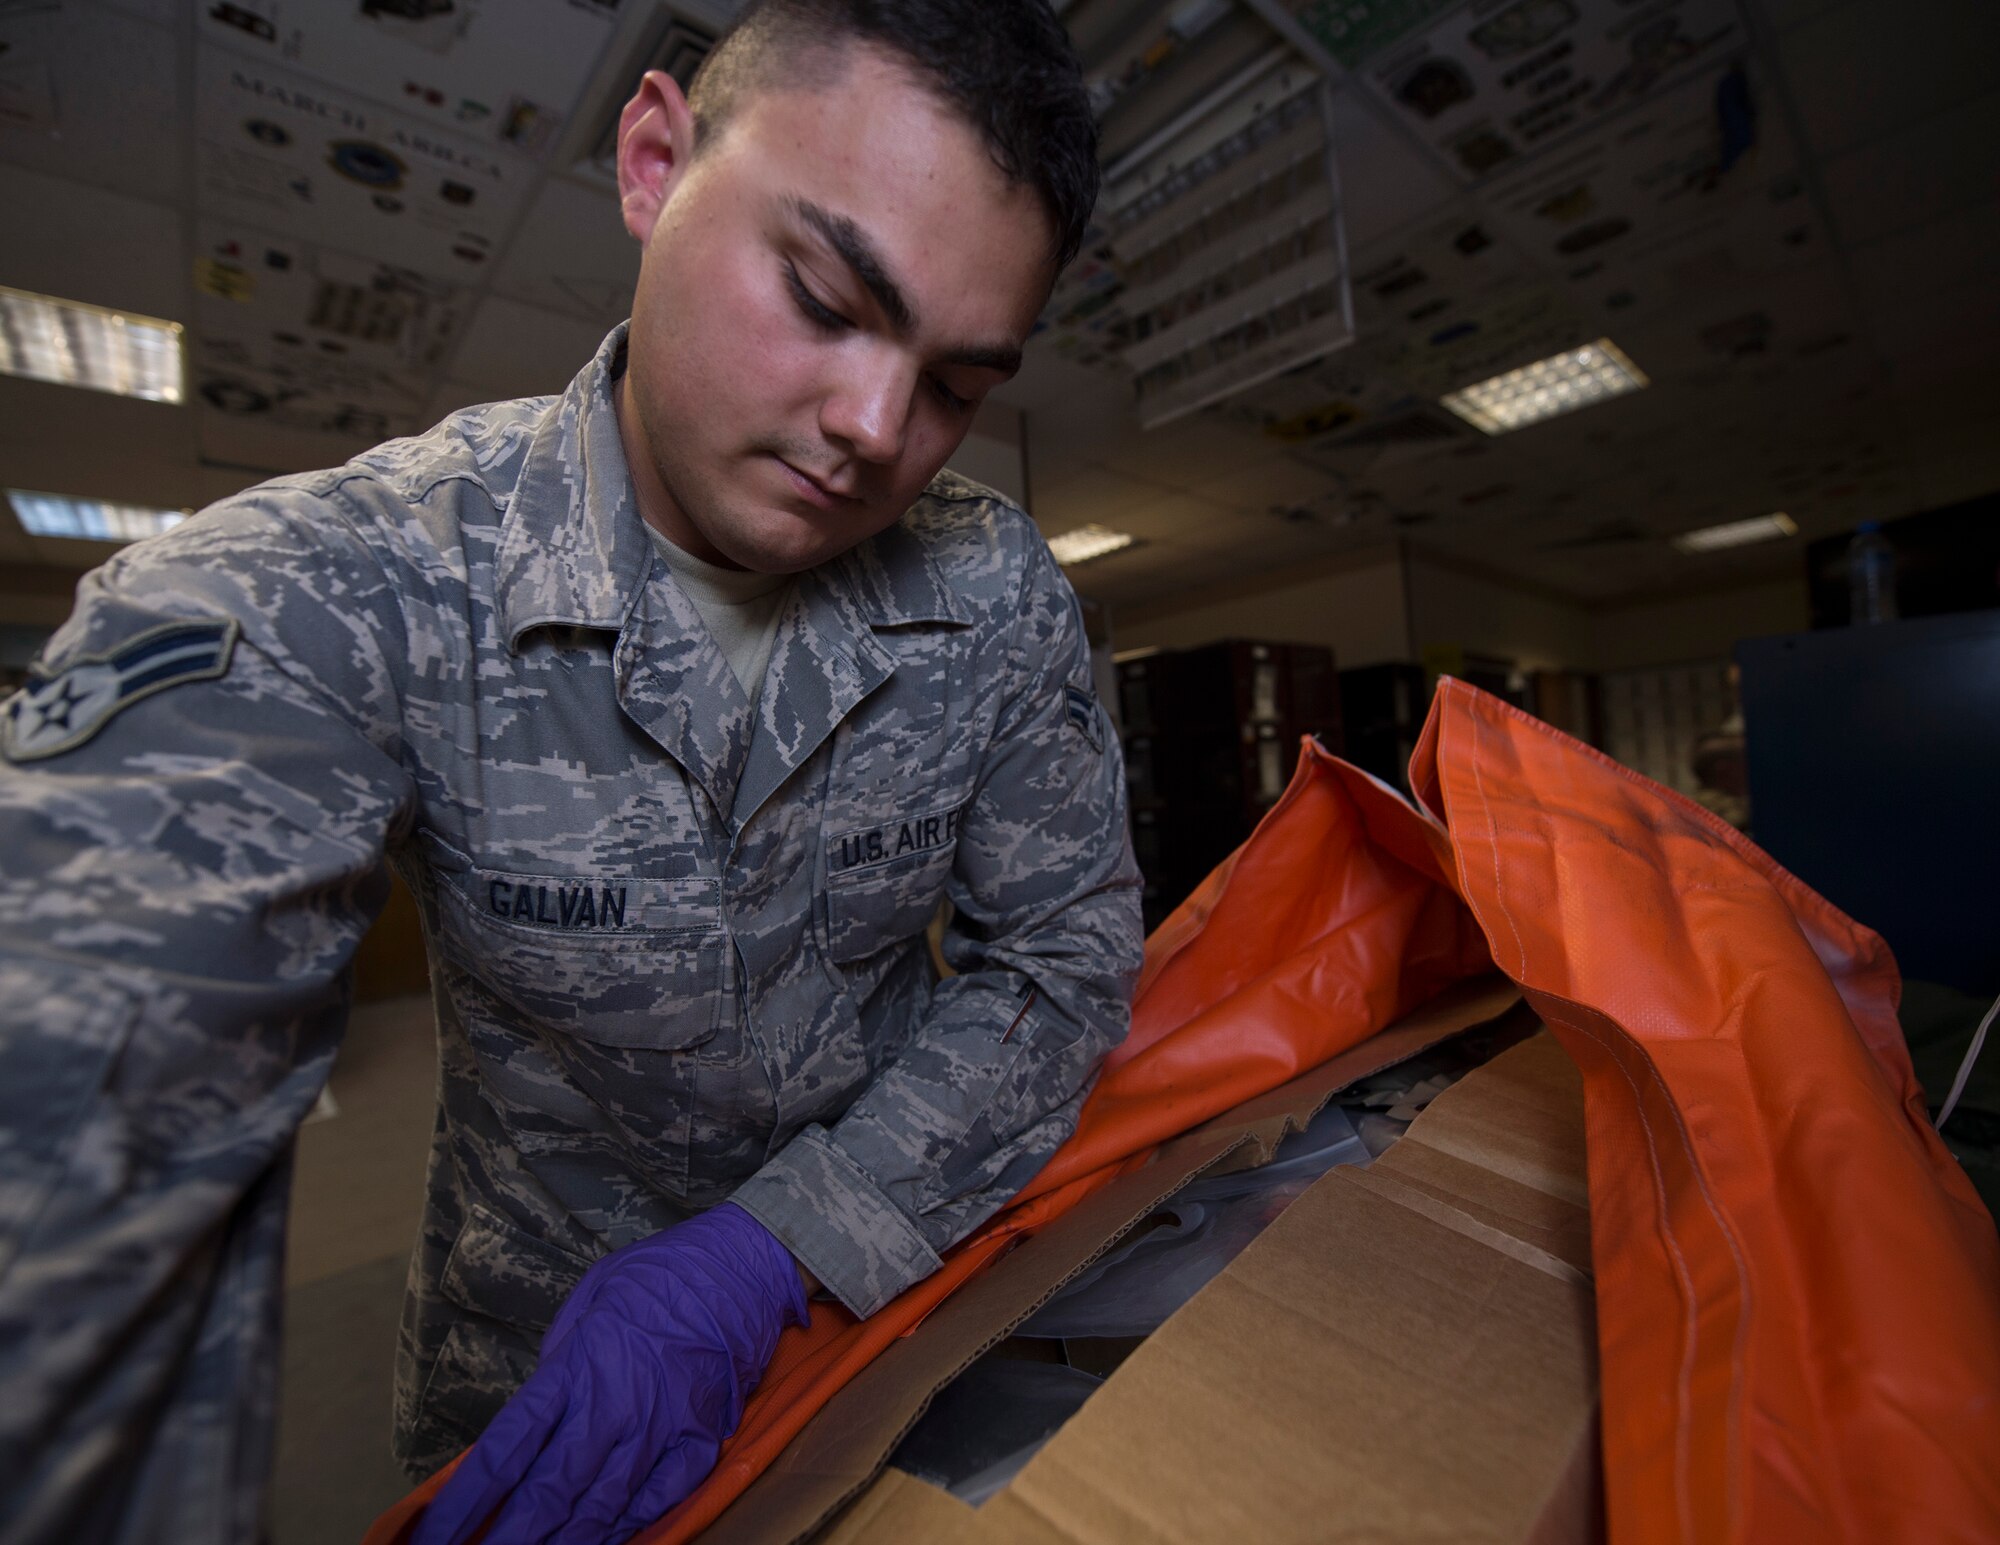 U.S. Air Force Airman 1st Class Dallas Galvan, an aircrew flight equipment technician with the 379th Expeditionary Operational Support Squadron, opens an aircrew survival equipment kit for inspection at Al Udeid Air Base, Qatar, May 16, 2017. The aircrew survival equipment kits are designed to keep aircrew members alive in the event of an emergency.  (U.S. Air Force photo by Tech. Sgt. Amy M. Lovgren)